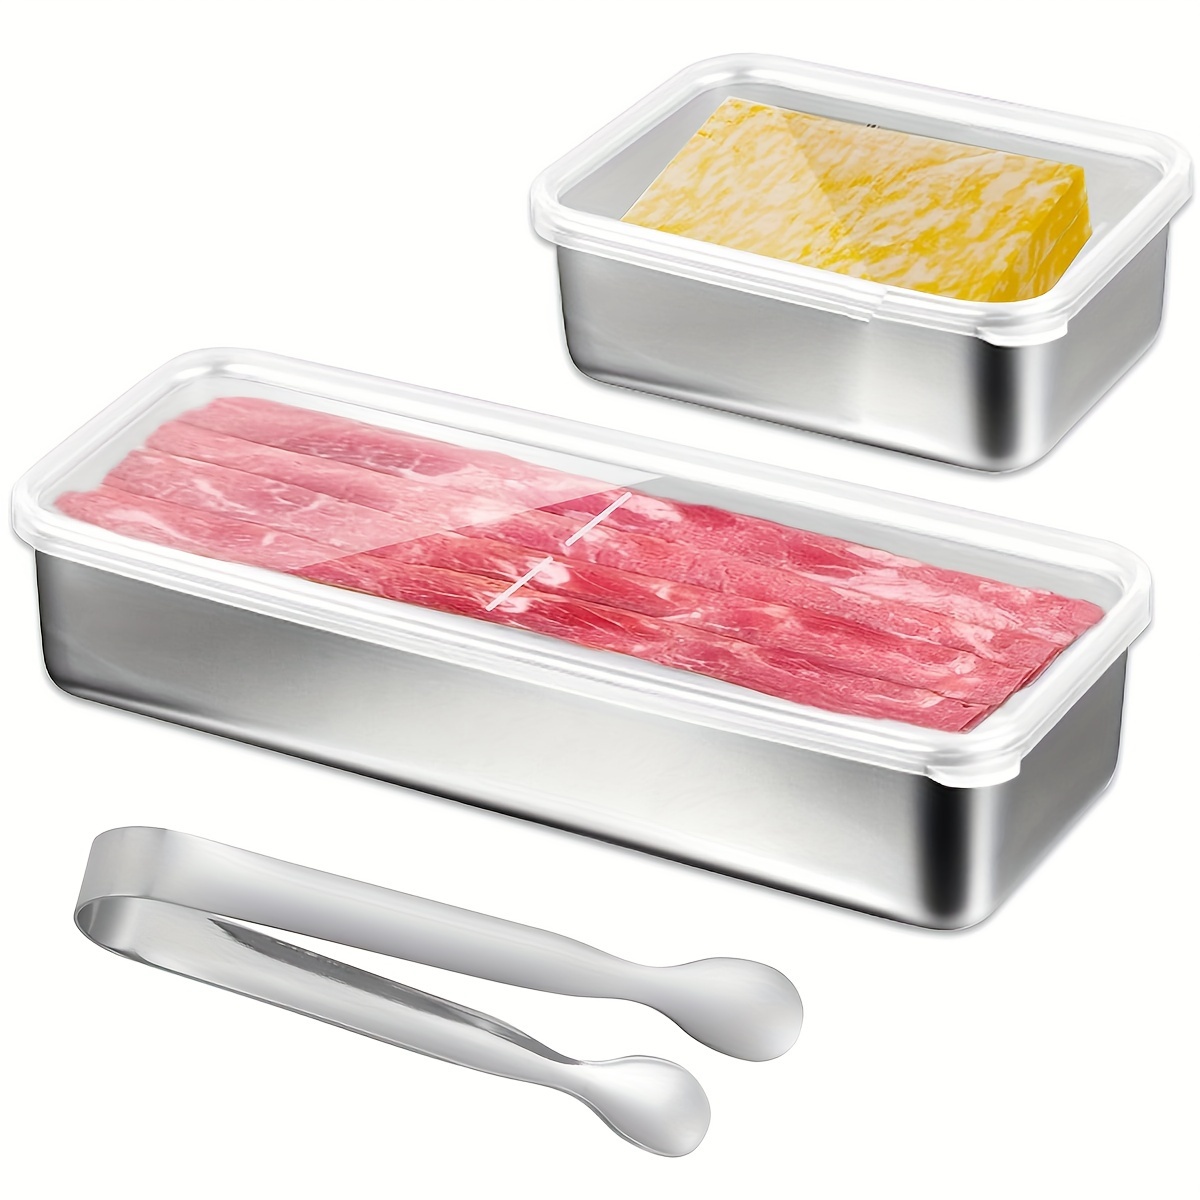 2pcs Cheese Container for Refrigerator, Bacon Container for Refrigerator, 304 Stainless Steel Airtight Deli Meat Storage Containers for Fridge